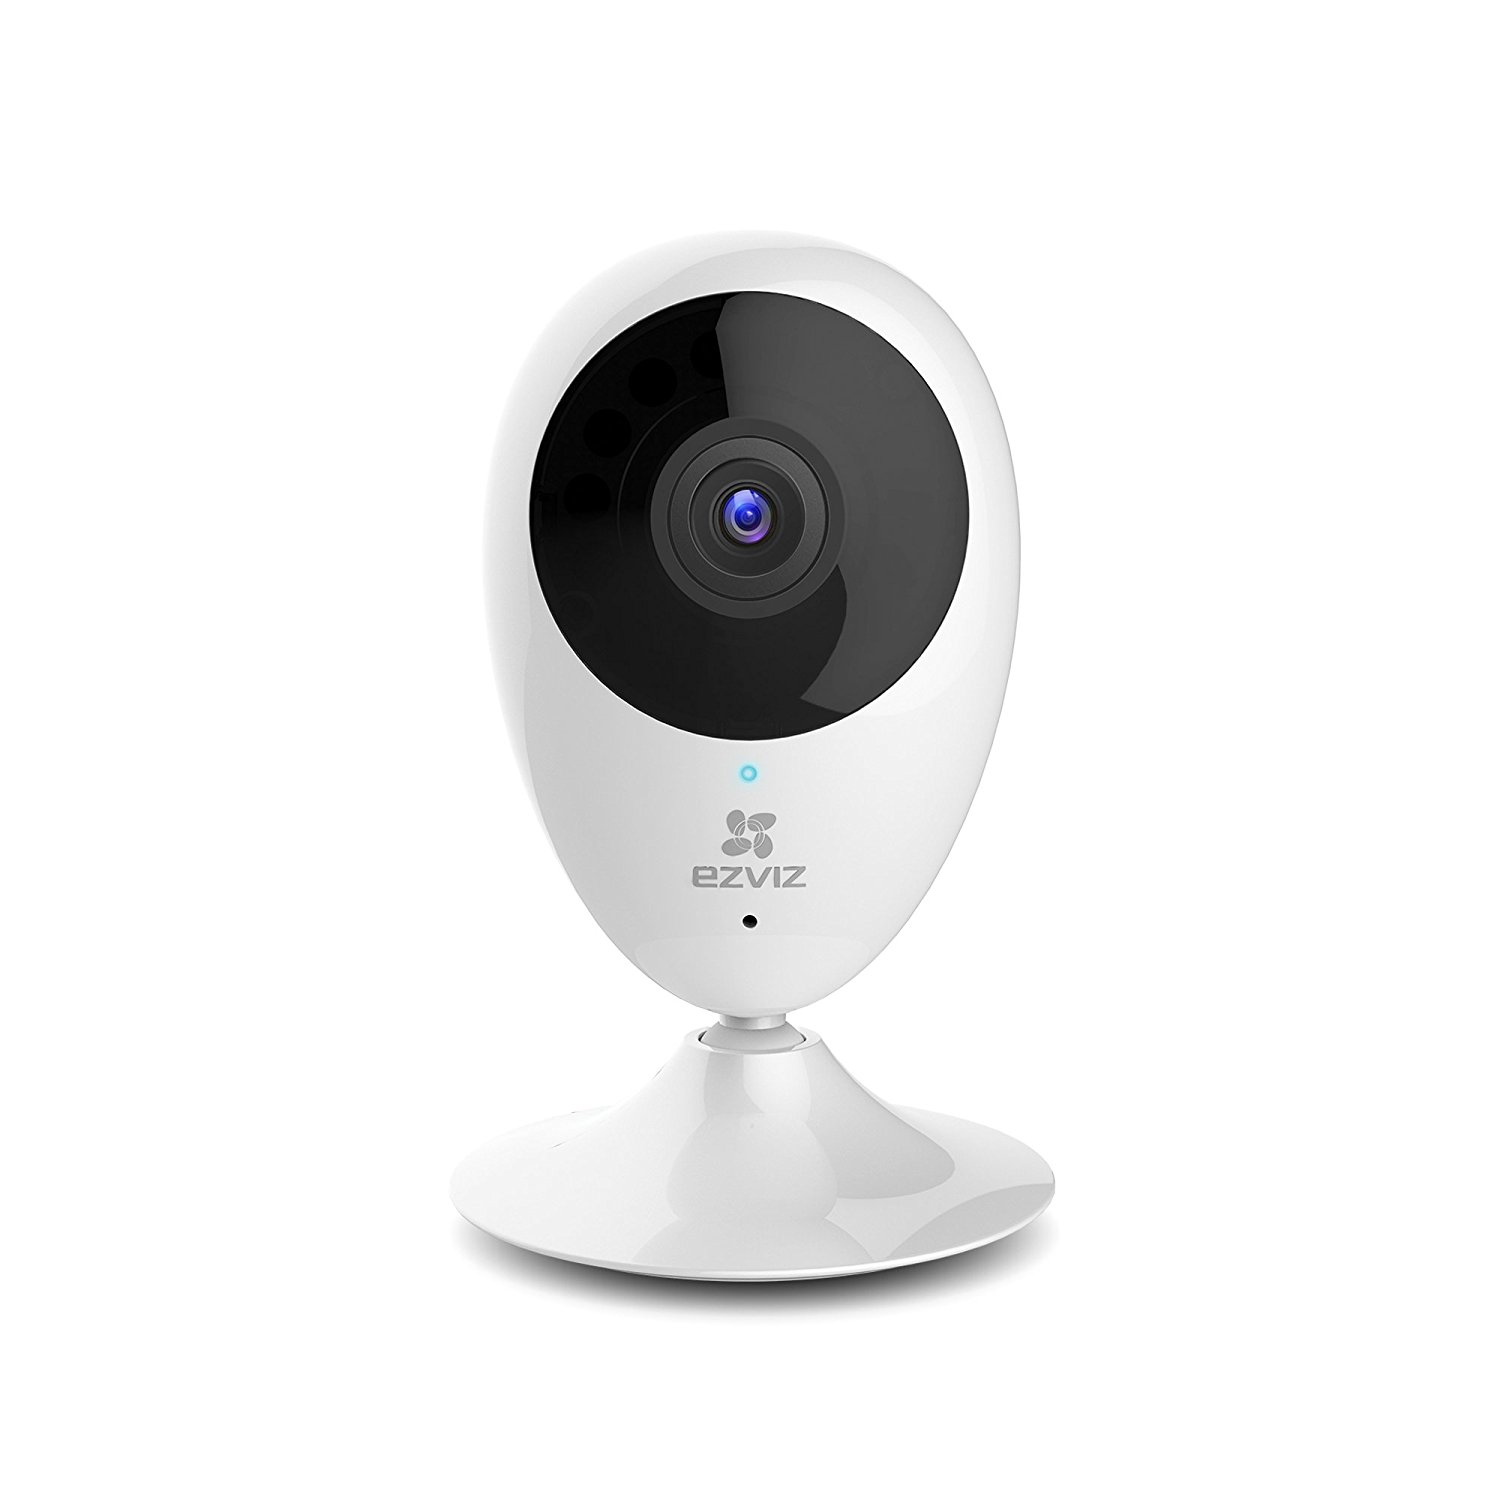 EZVIZ C2C HD Wi-Fi Home Indoor Video Monitoring Security Camera powered by Hikvision with motion detection, Works Day/Night, upto 16 feet IR support, Mobile live streaming, support upto 128GB SD card.